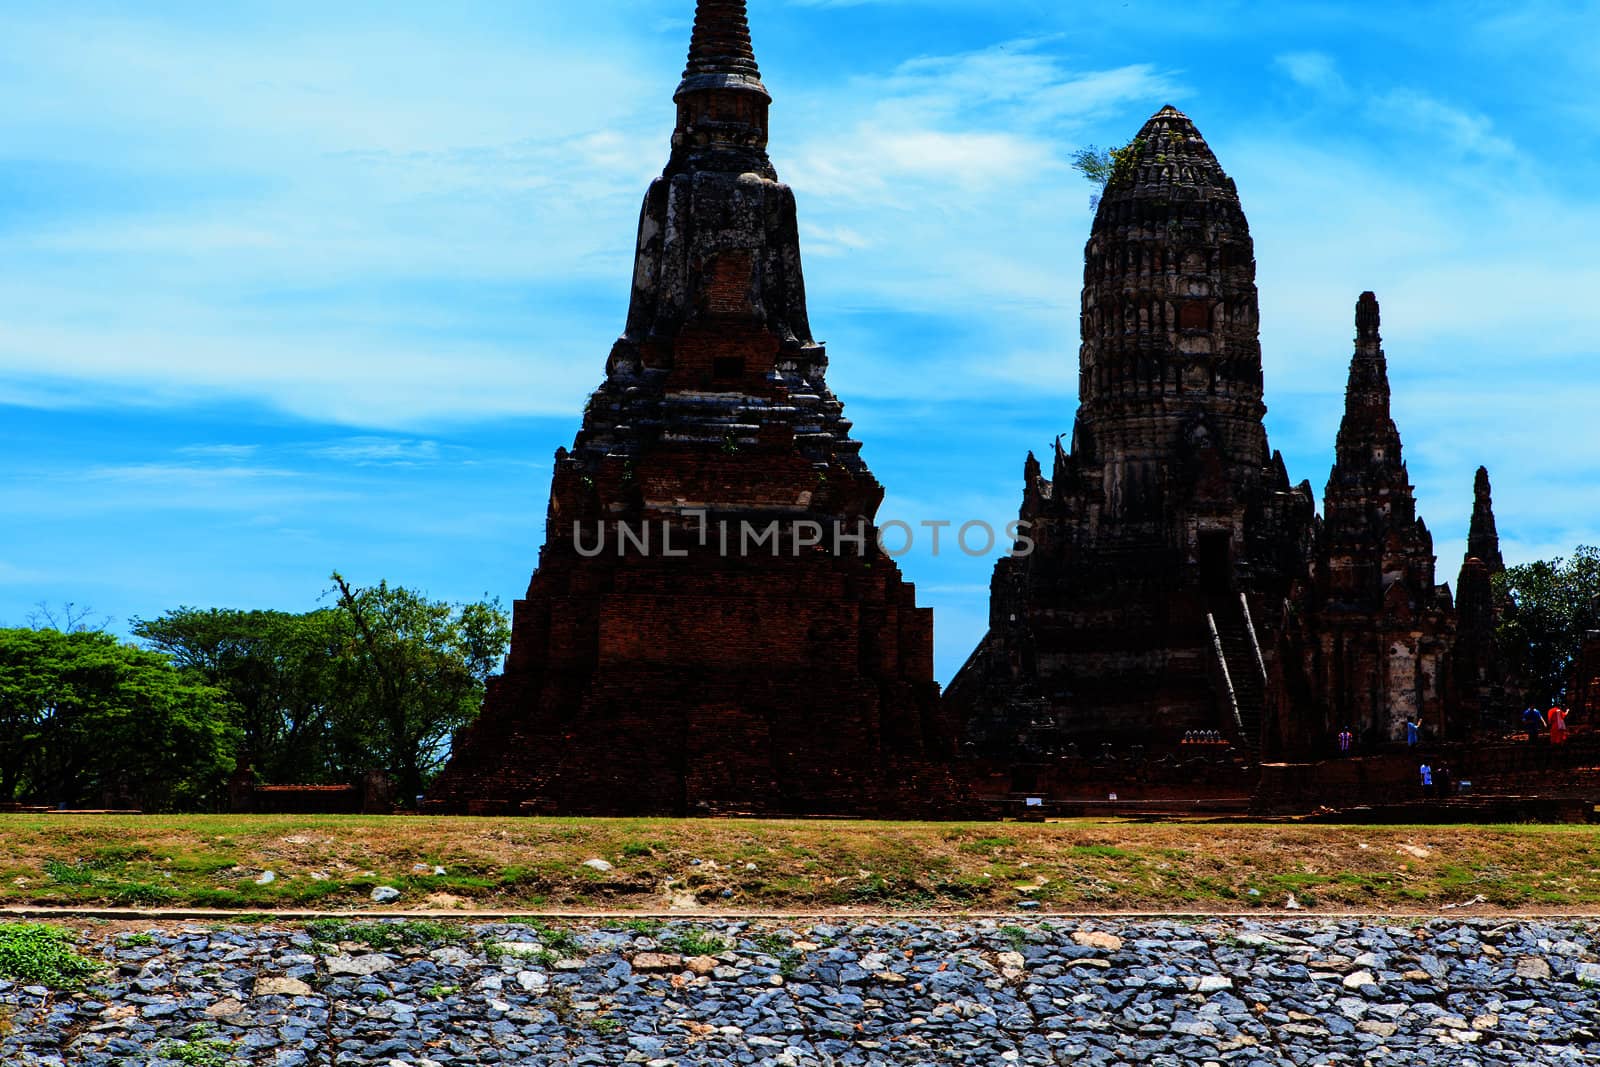 Chaiwatthanaram temple at Ayutthaya in Thailand and most famous for tourist take photo from the river.